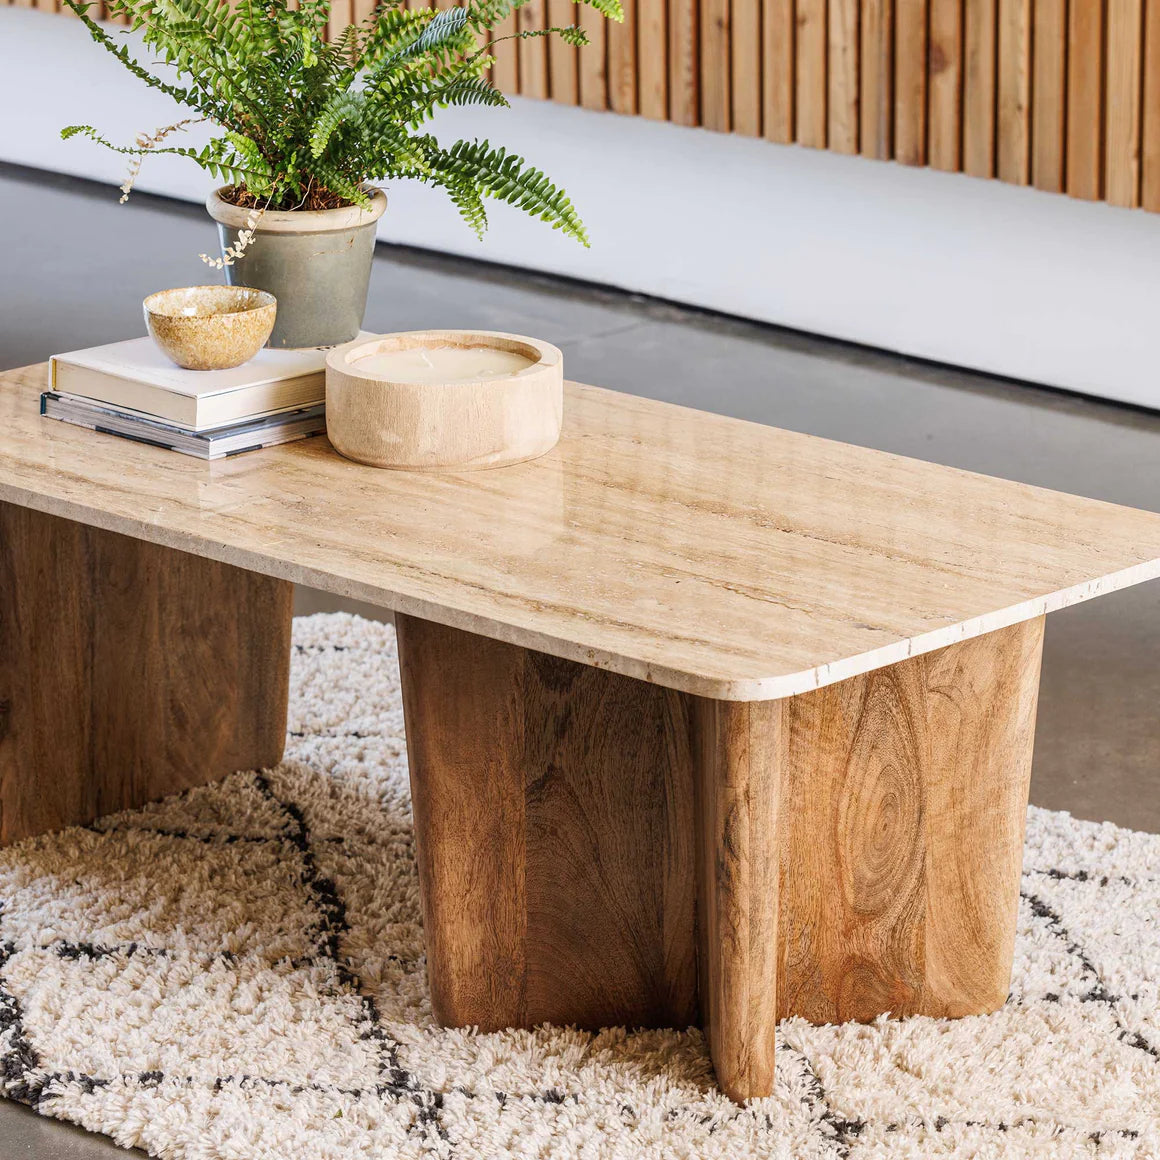 5 of the best unique coffee tables for a modern rustic style